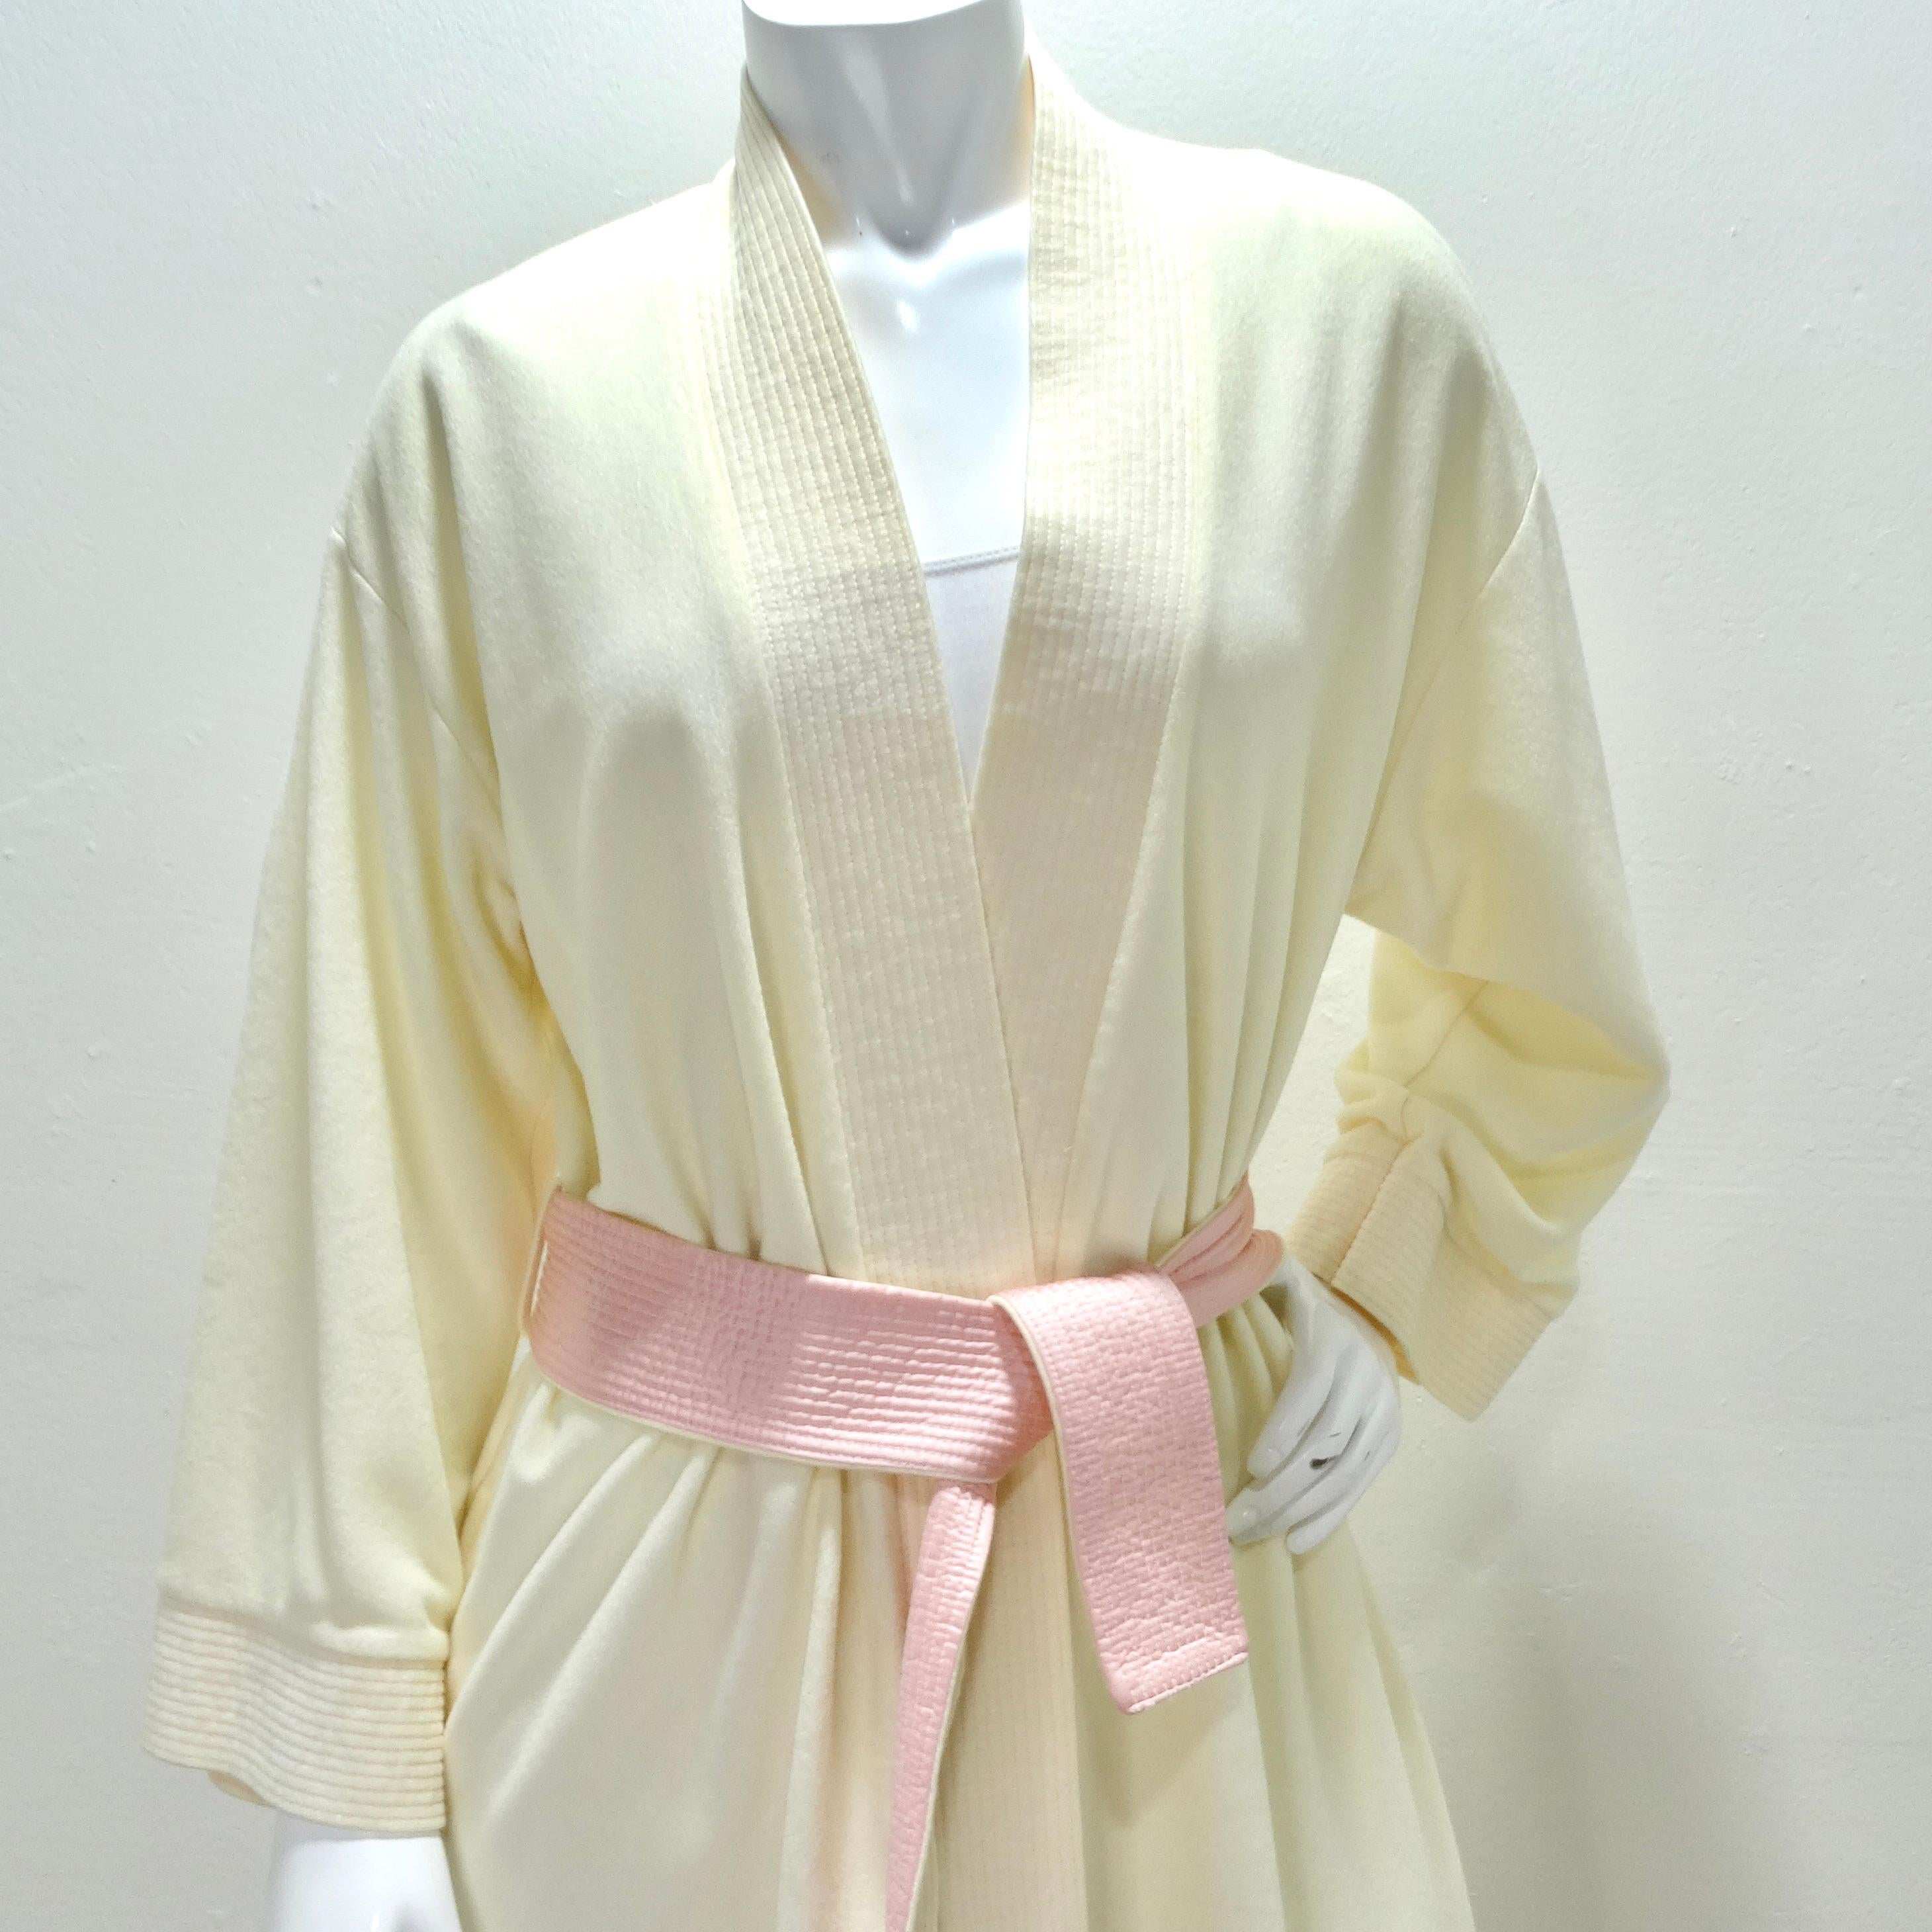 Introducing the Bill Tice 1980s Lotus Flower Robe – a timeless piece of luxury and style. This classic ivory robe is more than just loungewear; it's a statement of elegance and comfort. Crafted with care and attention to detail, it features a soft,